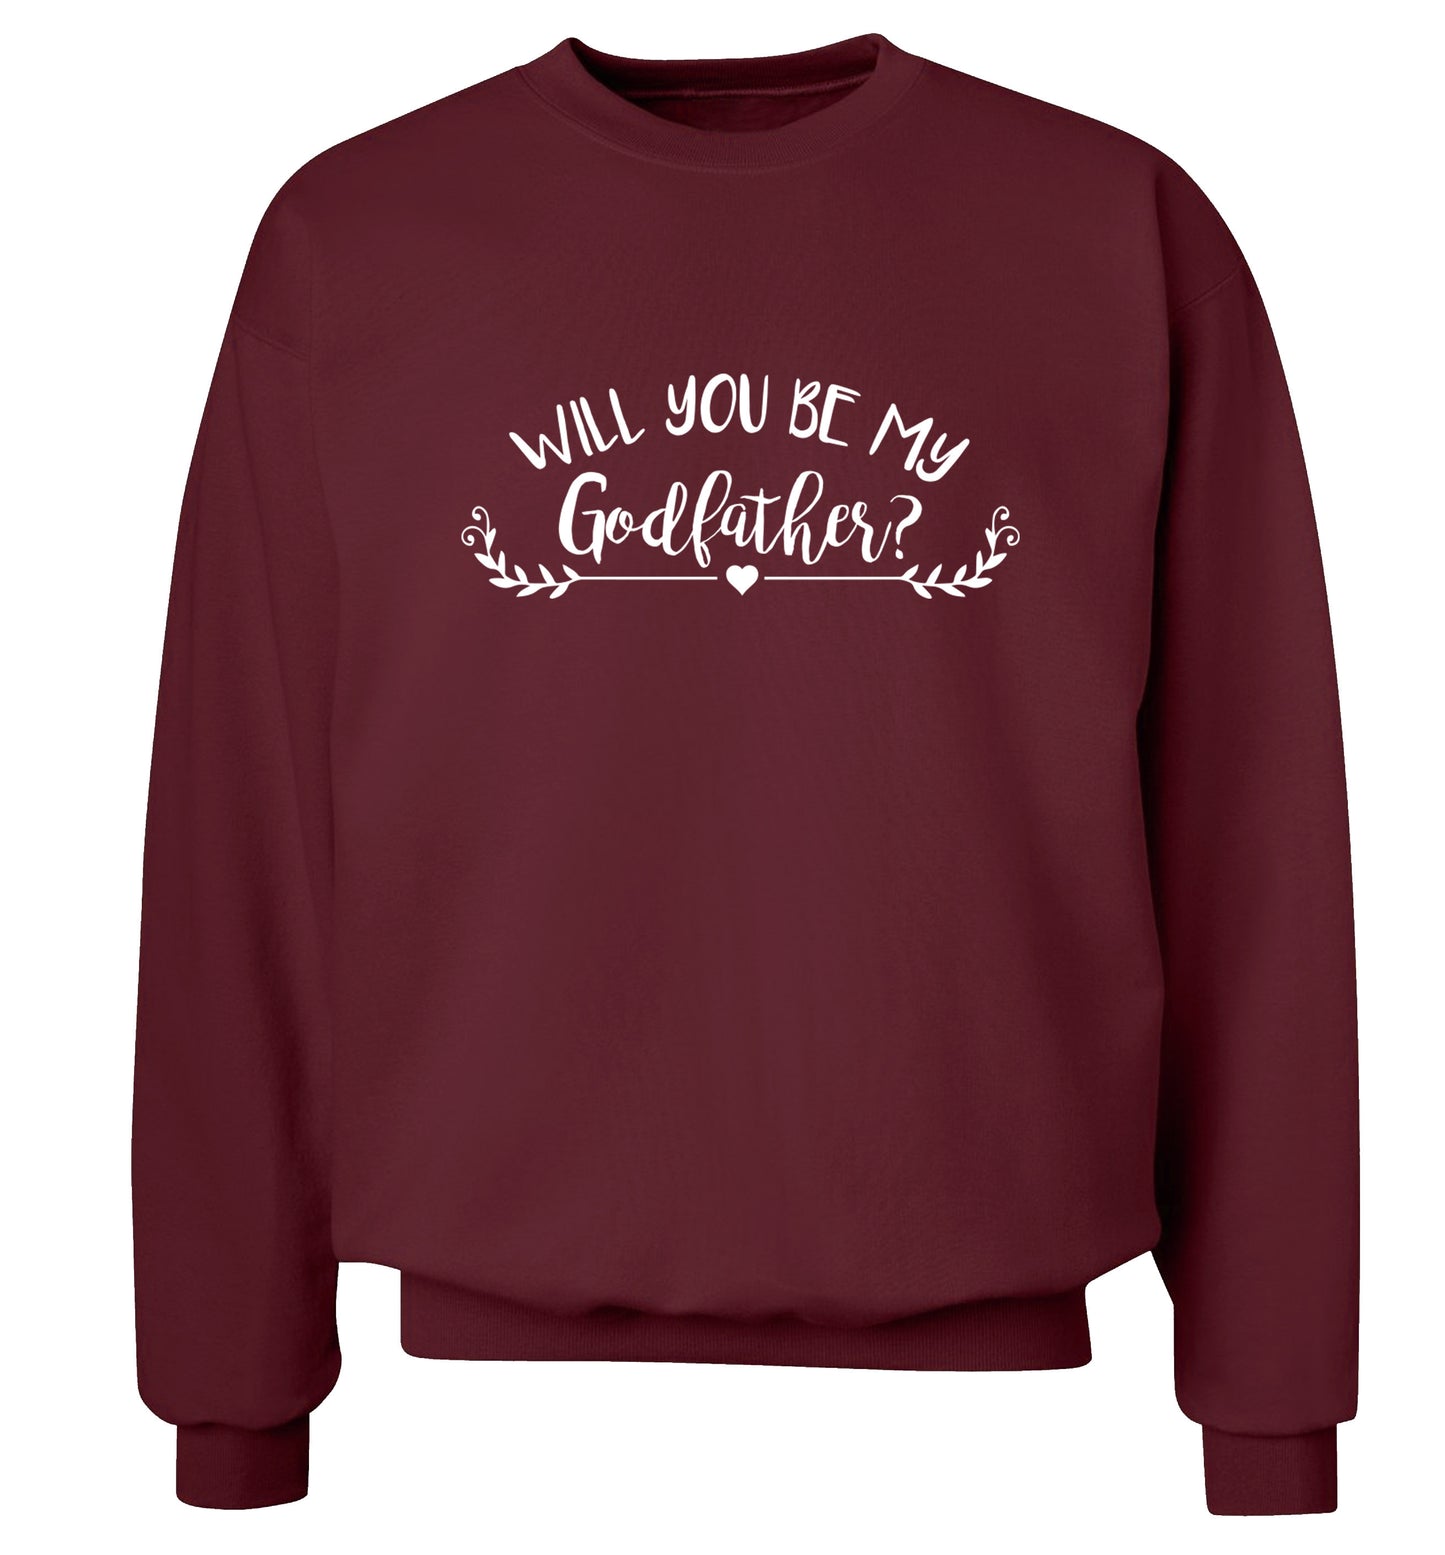 Will you be my godfather? Adult's unisex maroon Sweater 2XL